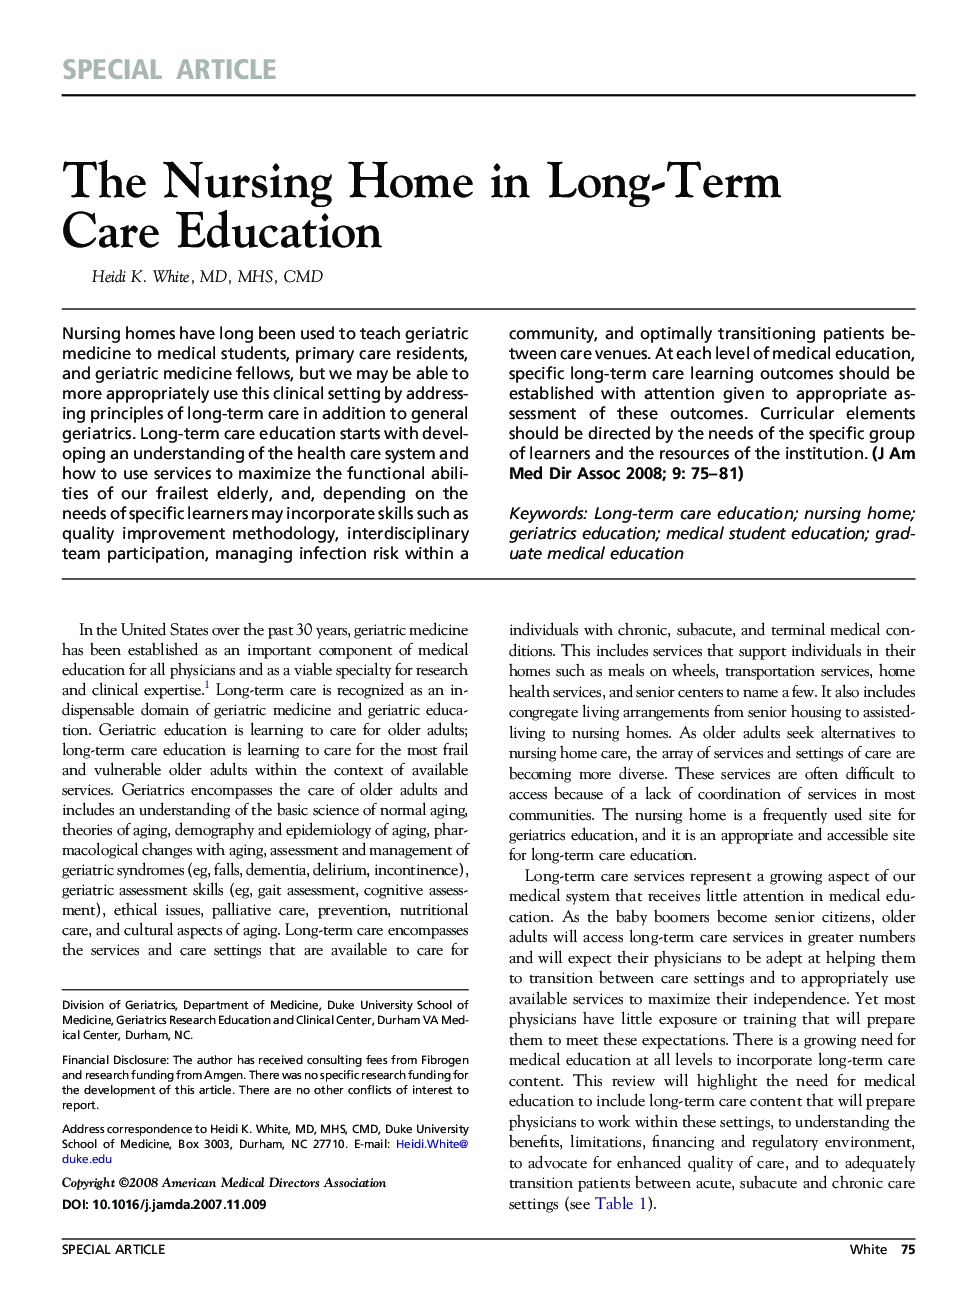 The Nursing Home in Long-Term Care Education